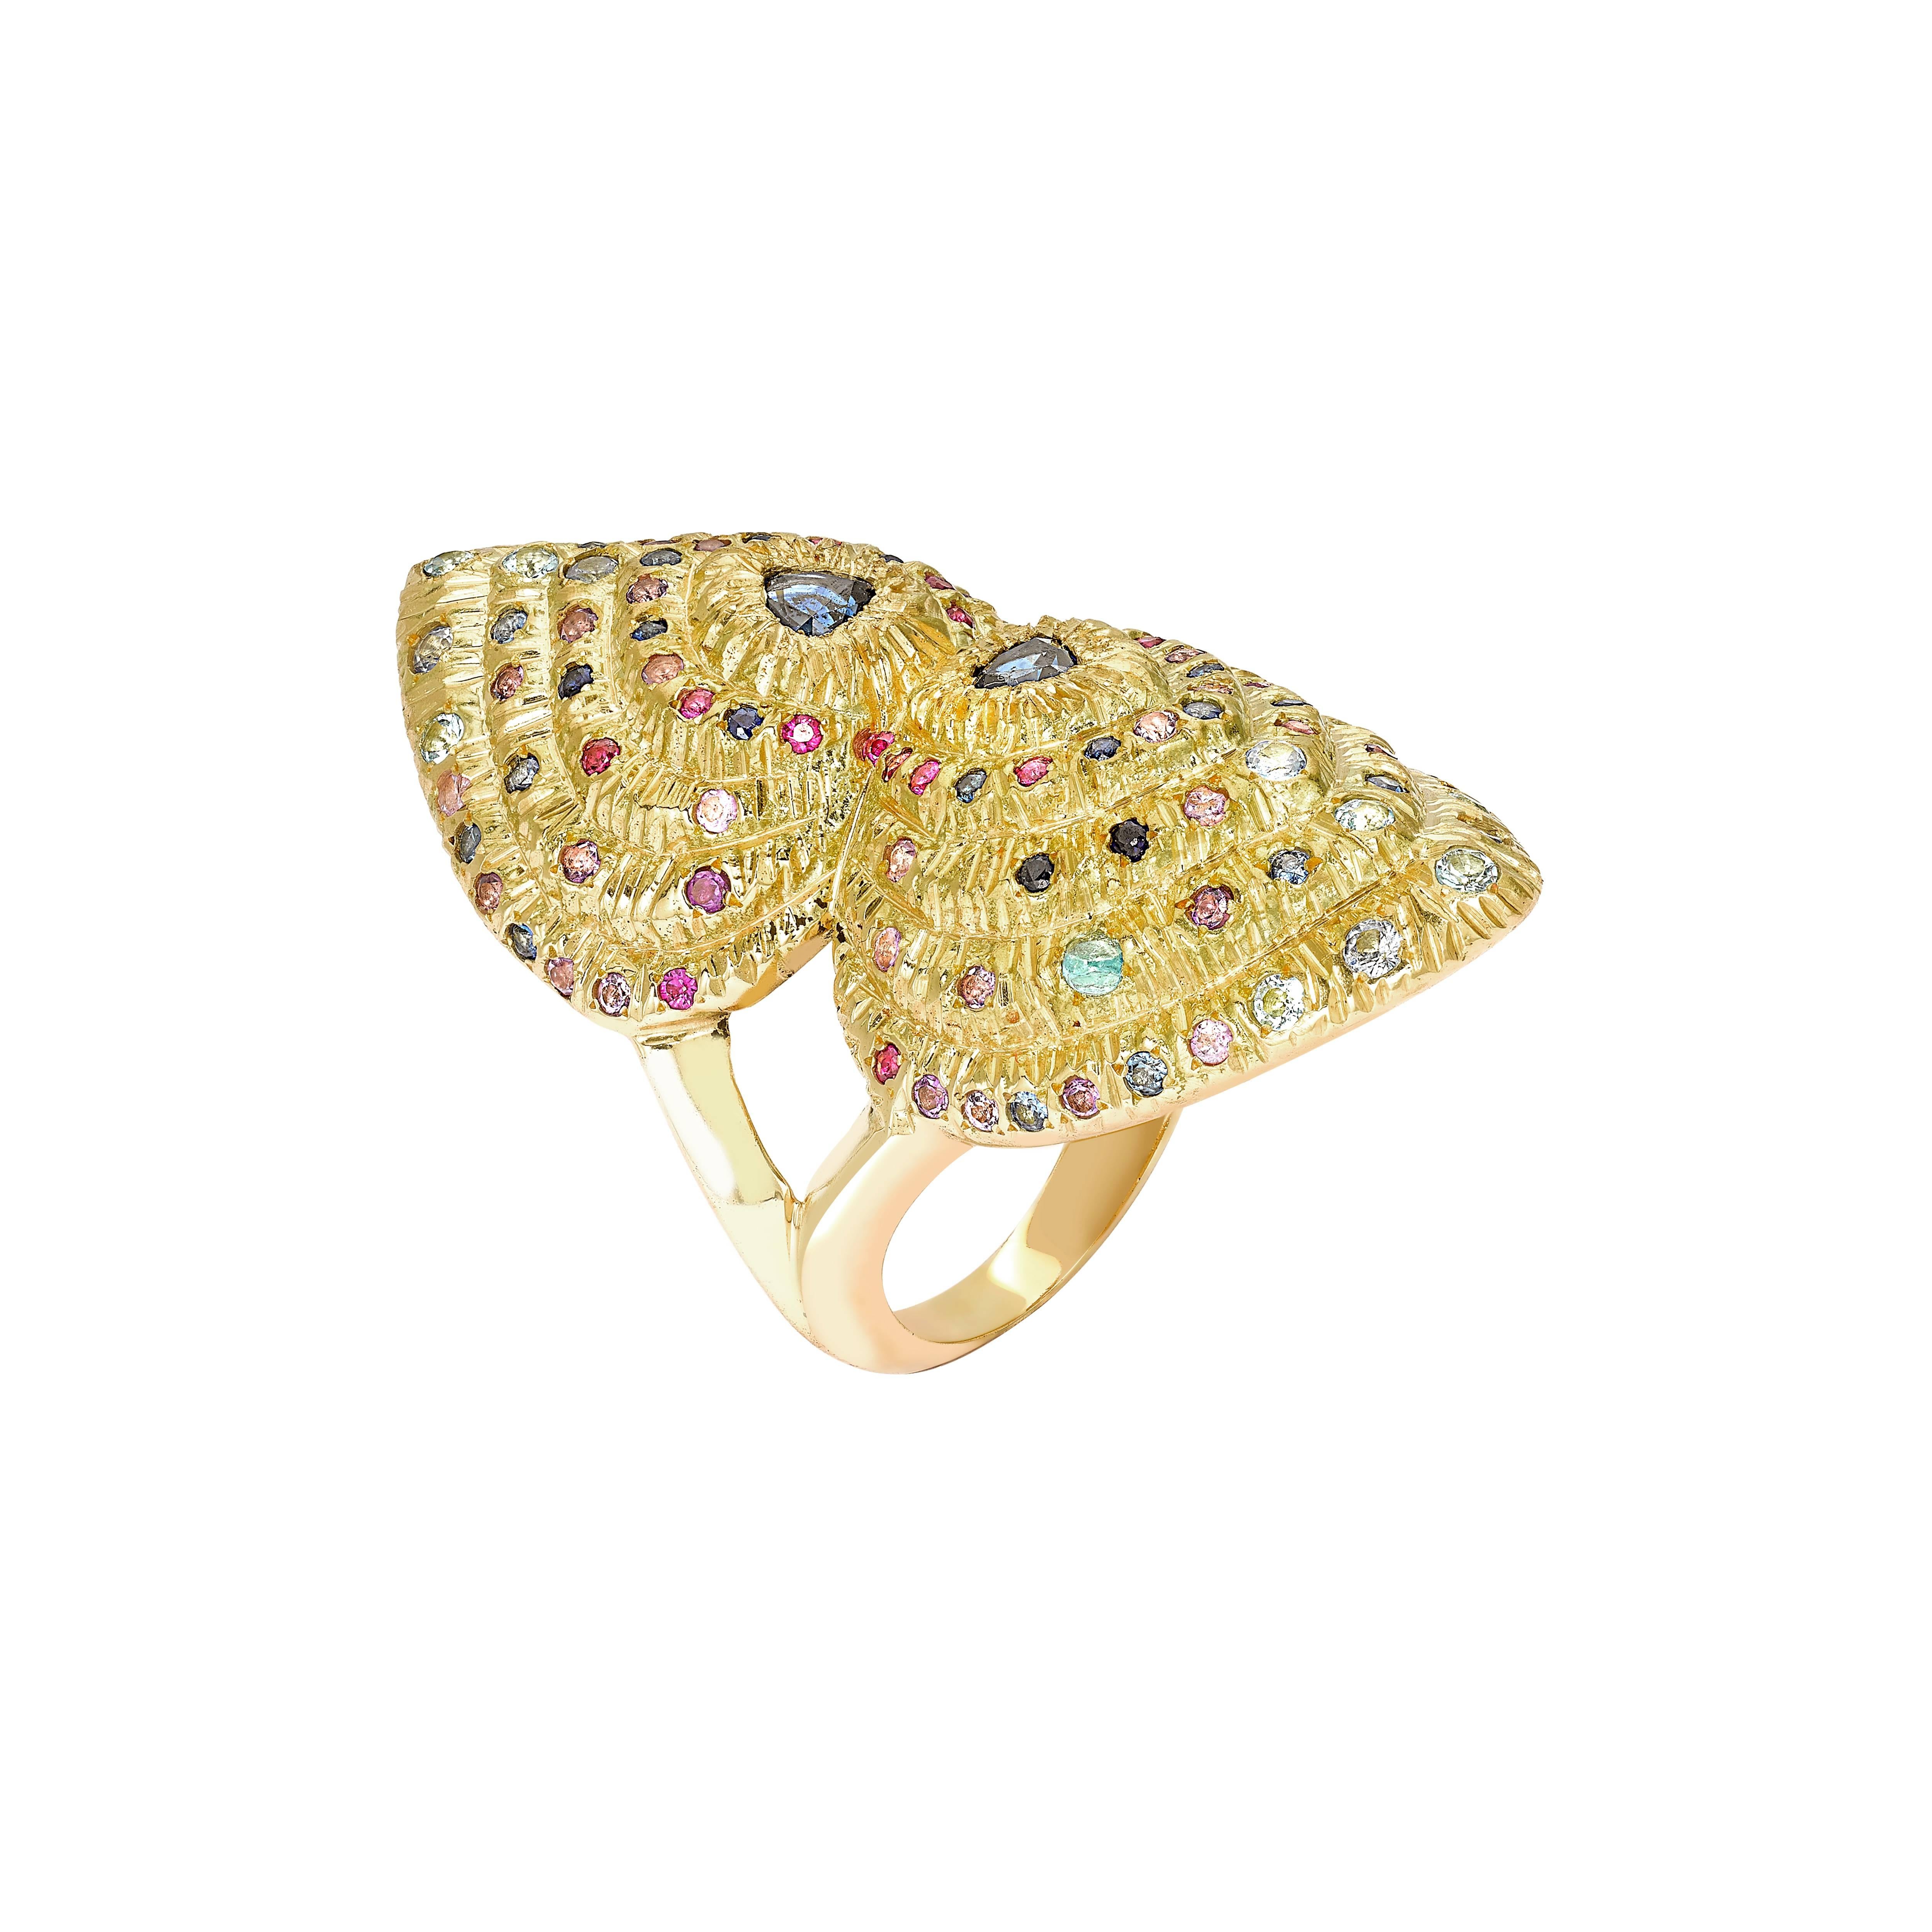 Ring size: 49, 51, 52 & 54 
(Alternative sizes available on a made to order basis, with an estimated delivery time of 4-6 weeks)

18k Yellow Gold 16.80gr, 38 Blue Sapphires 0.41, 42 Amethysts 0.22ct, 18 Rubies 0.10ct and 10 Blue Topaz 0.19ct

Shells